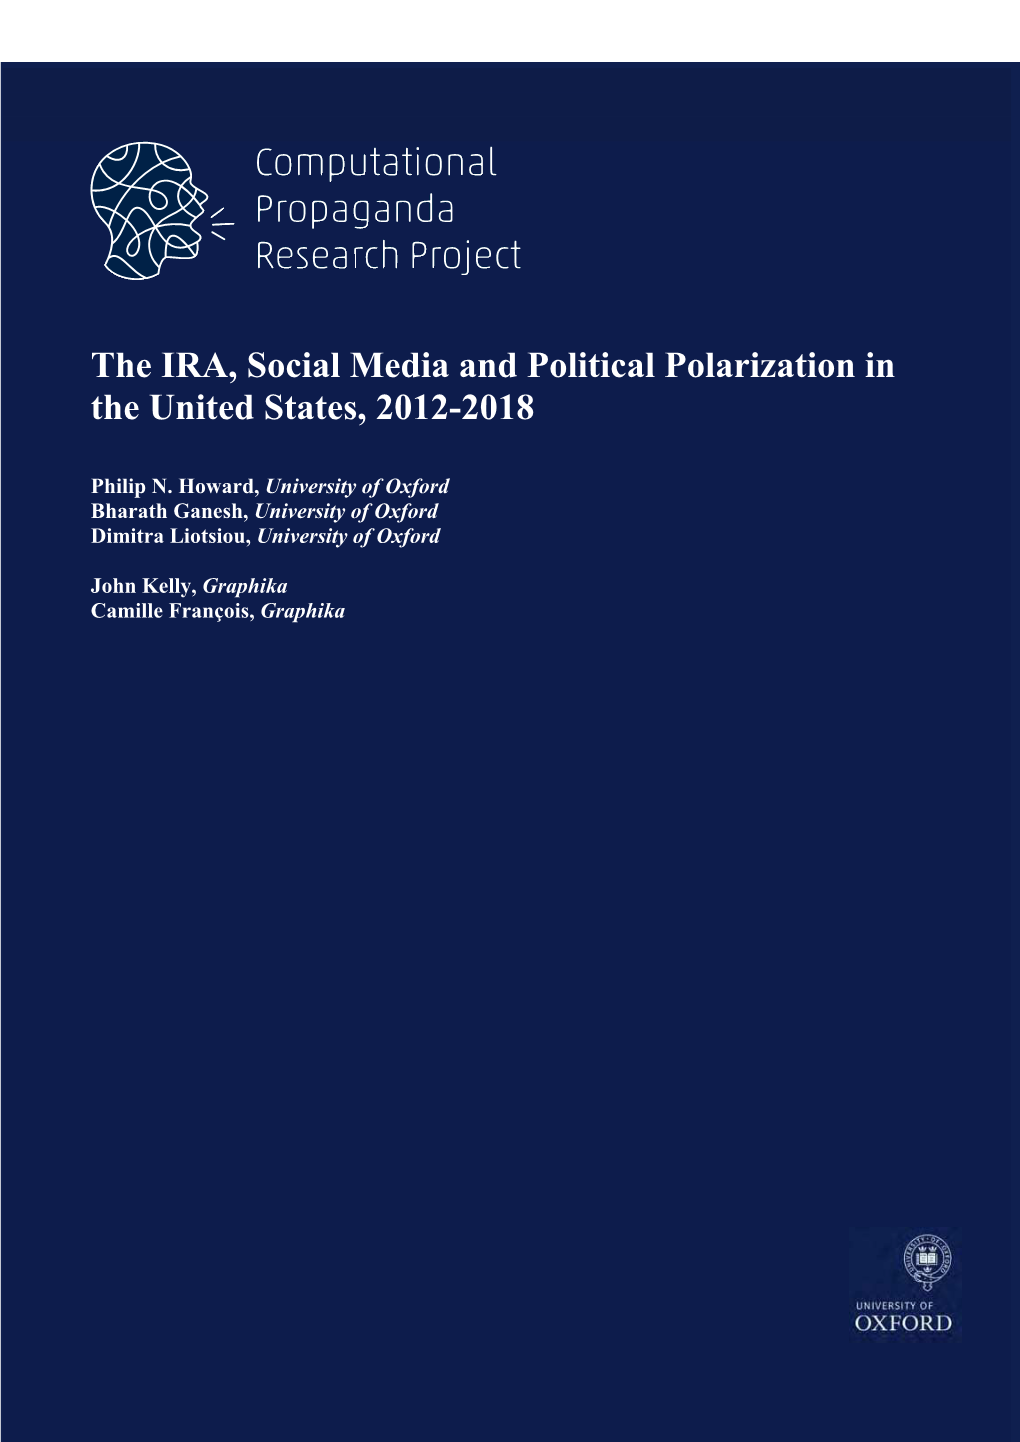 The IRA, Social Media and Political Polarization in the United States, 2012-2018